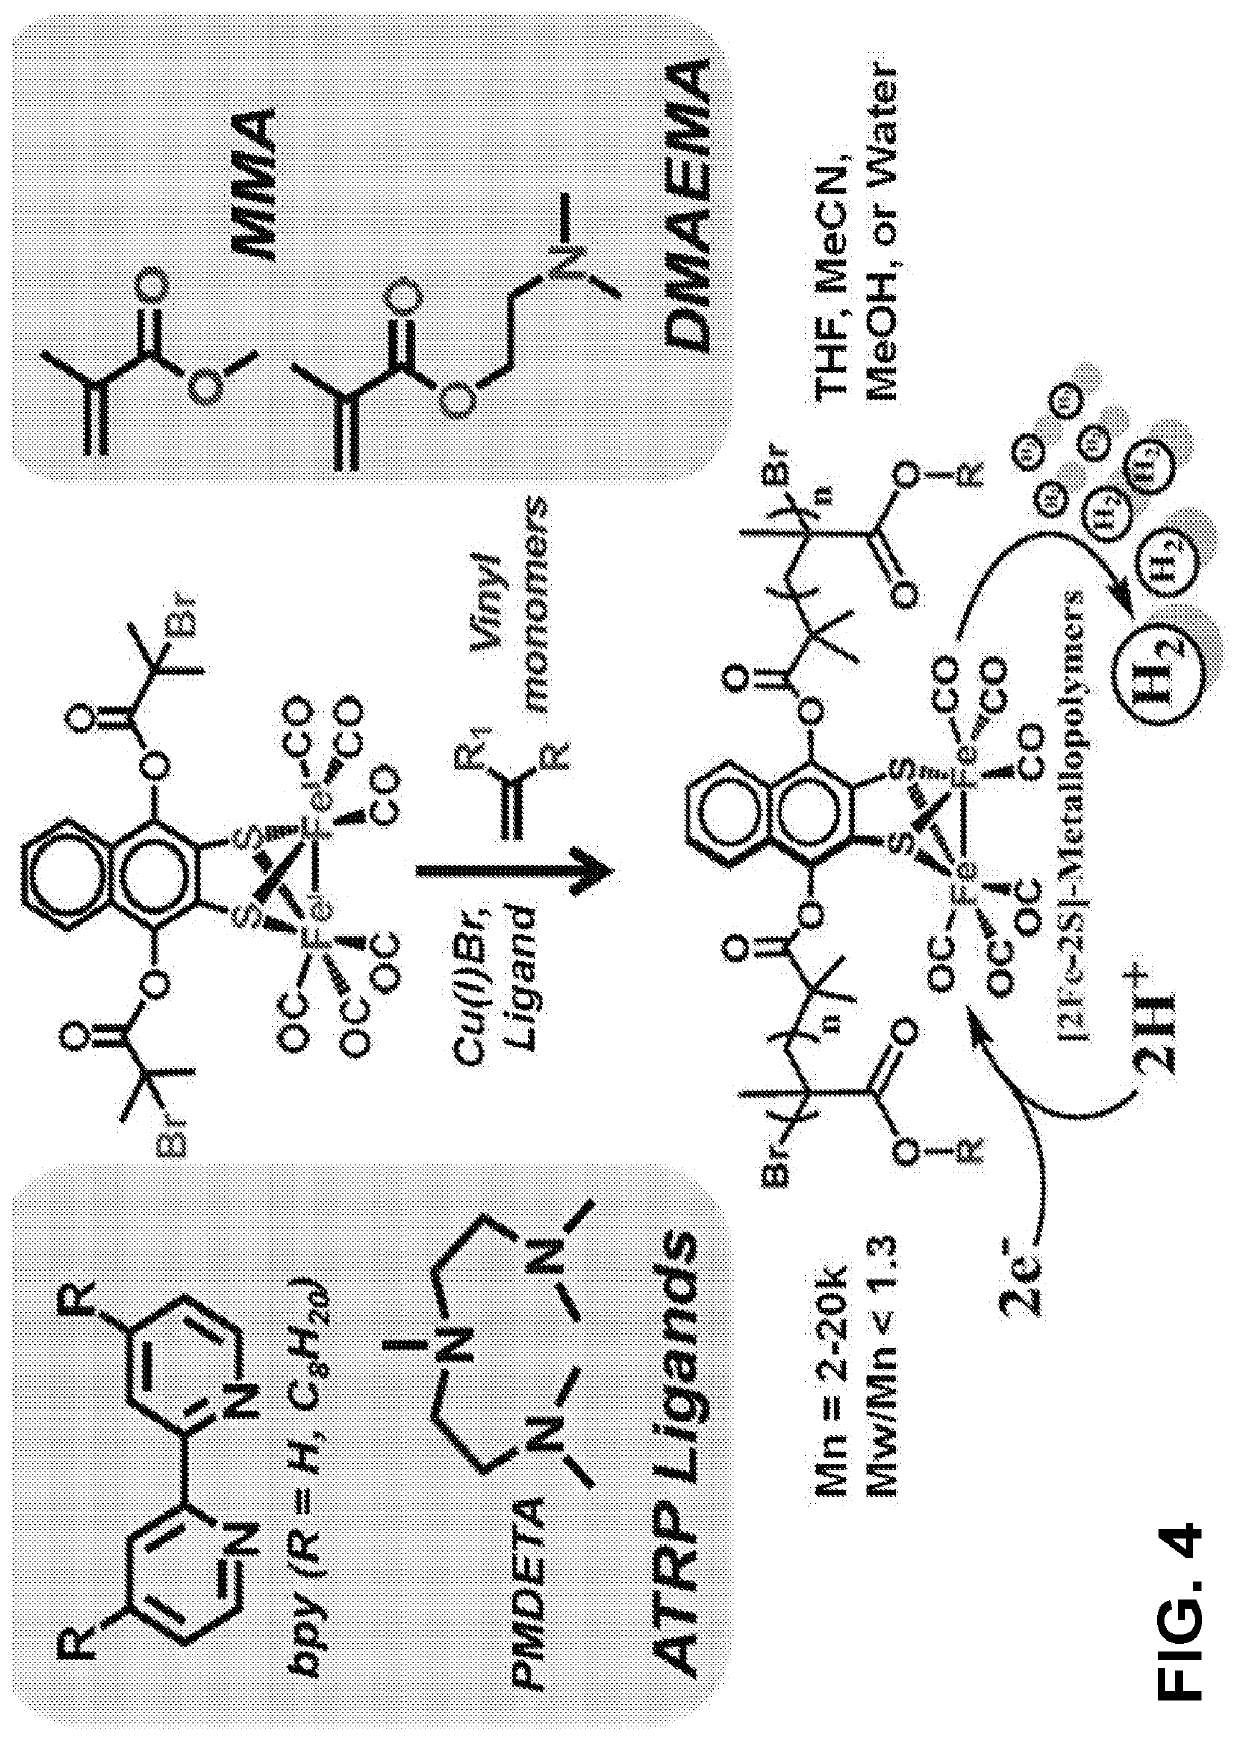 Metallopolymers for catalytic generation of hydrogen